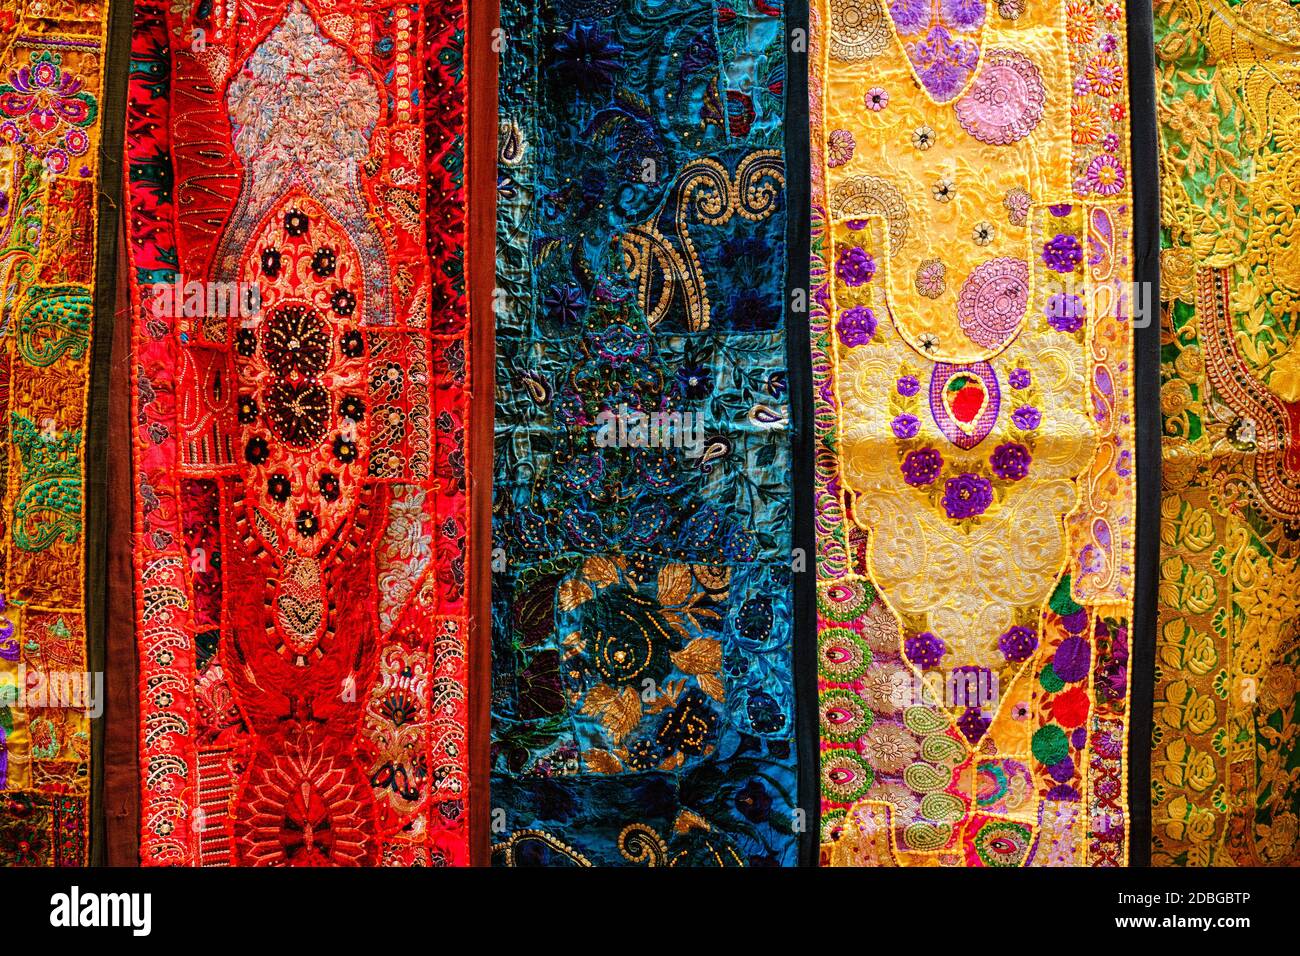 Indian patchwork fabric with traditional Indian patterns close up.  Jasialmer, Radjasthan, India Exotic Patchwork Quilt Stock Photo - Alamy